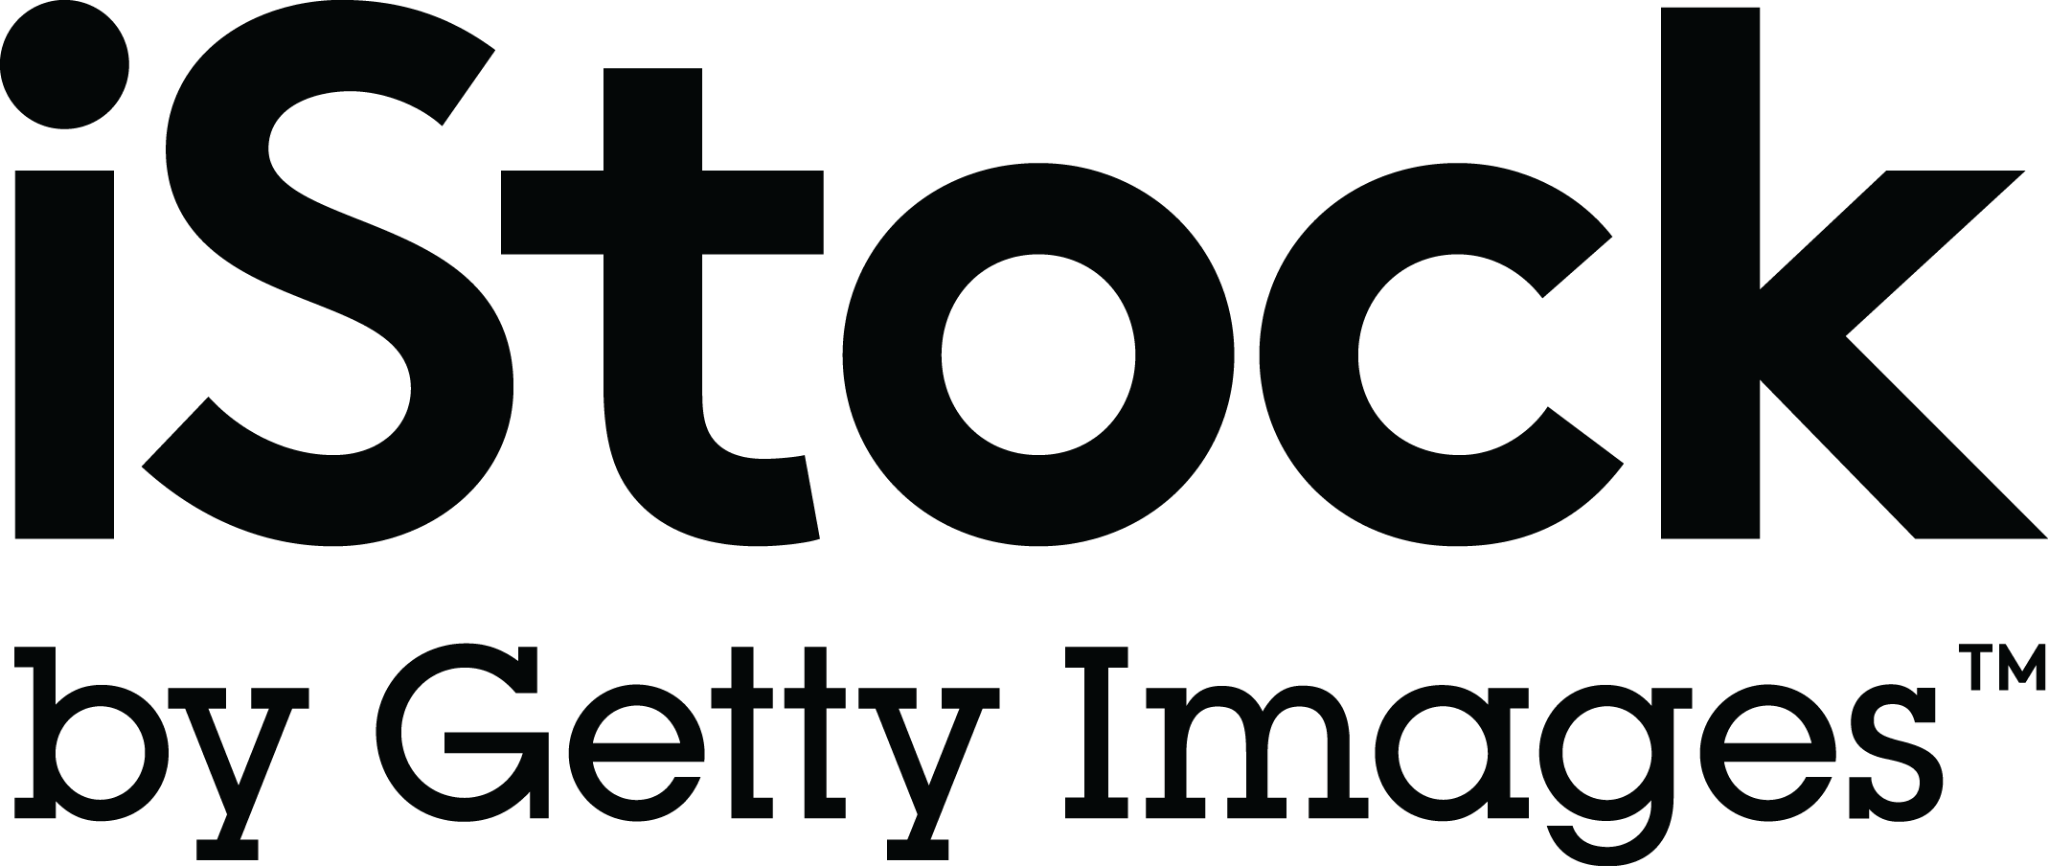 iStock is a paid website that offers thousands of ad images and videos.